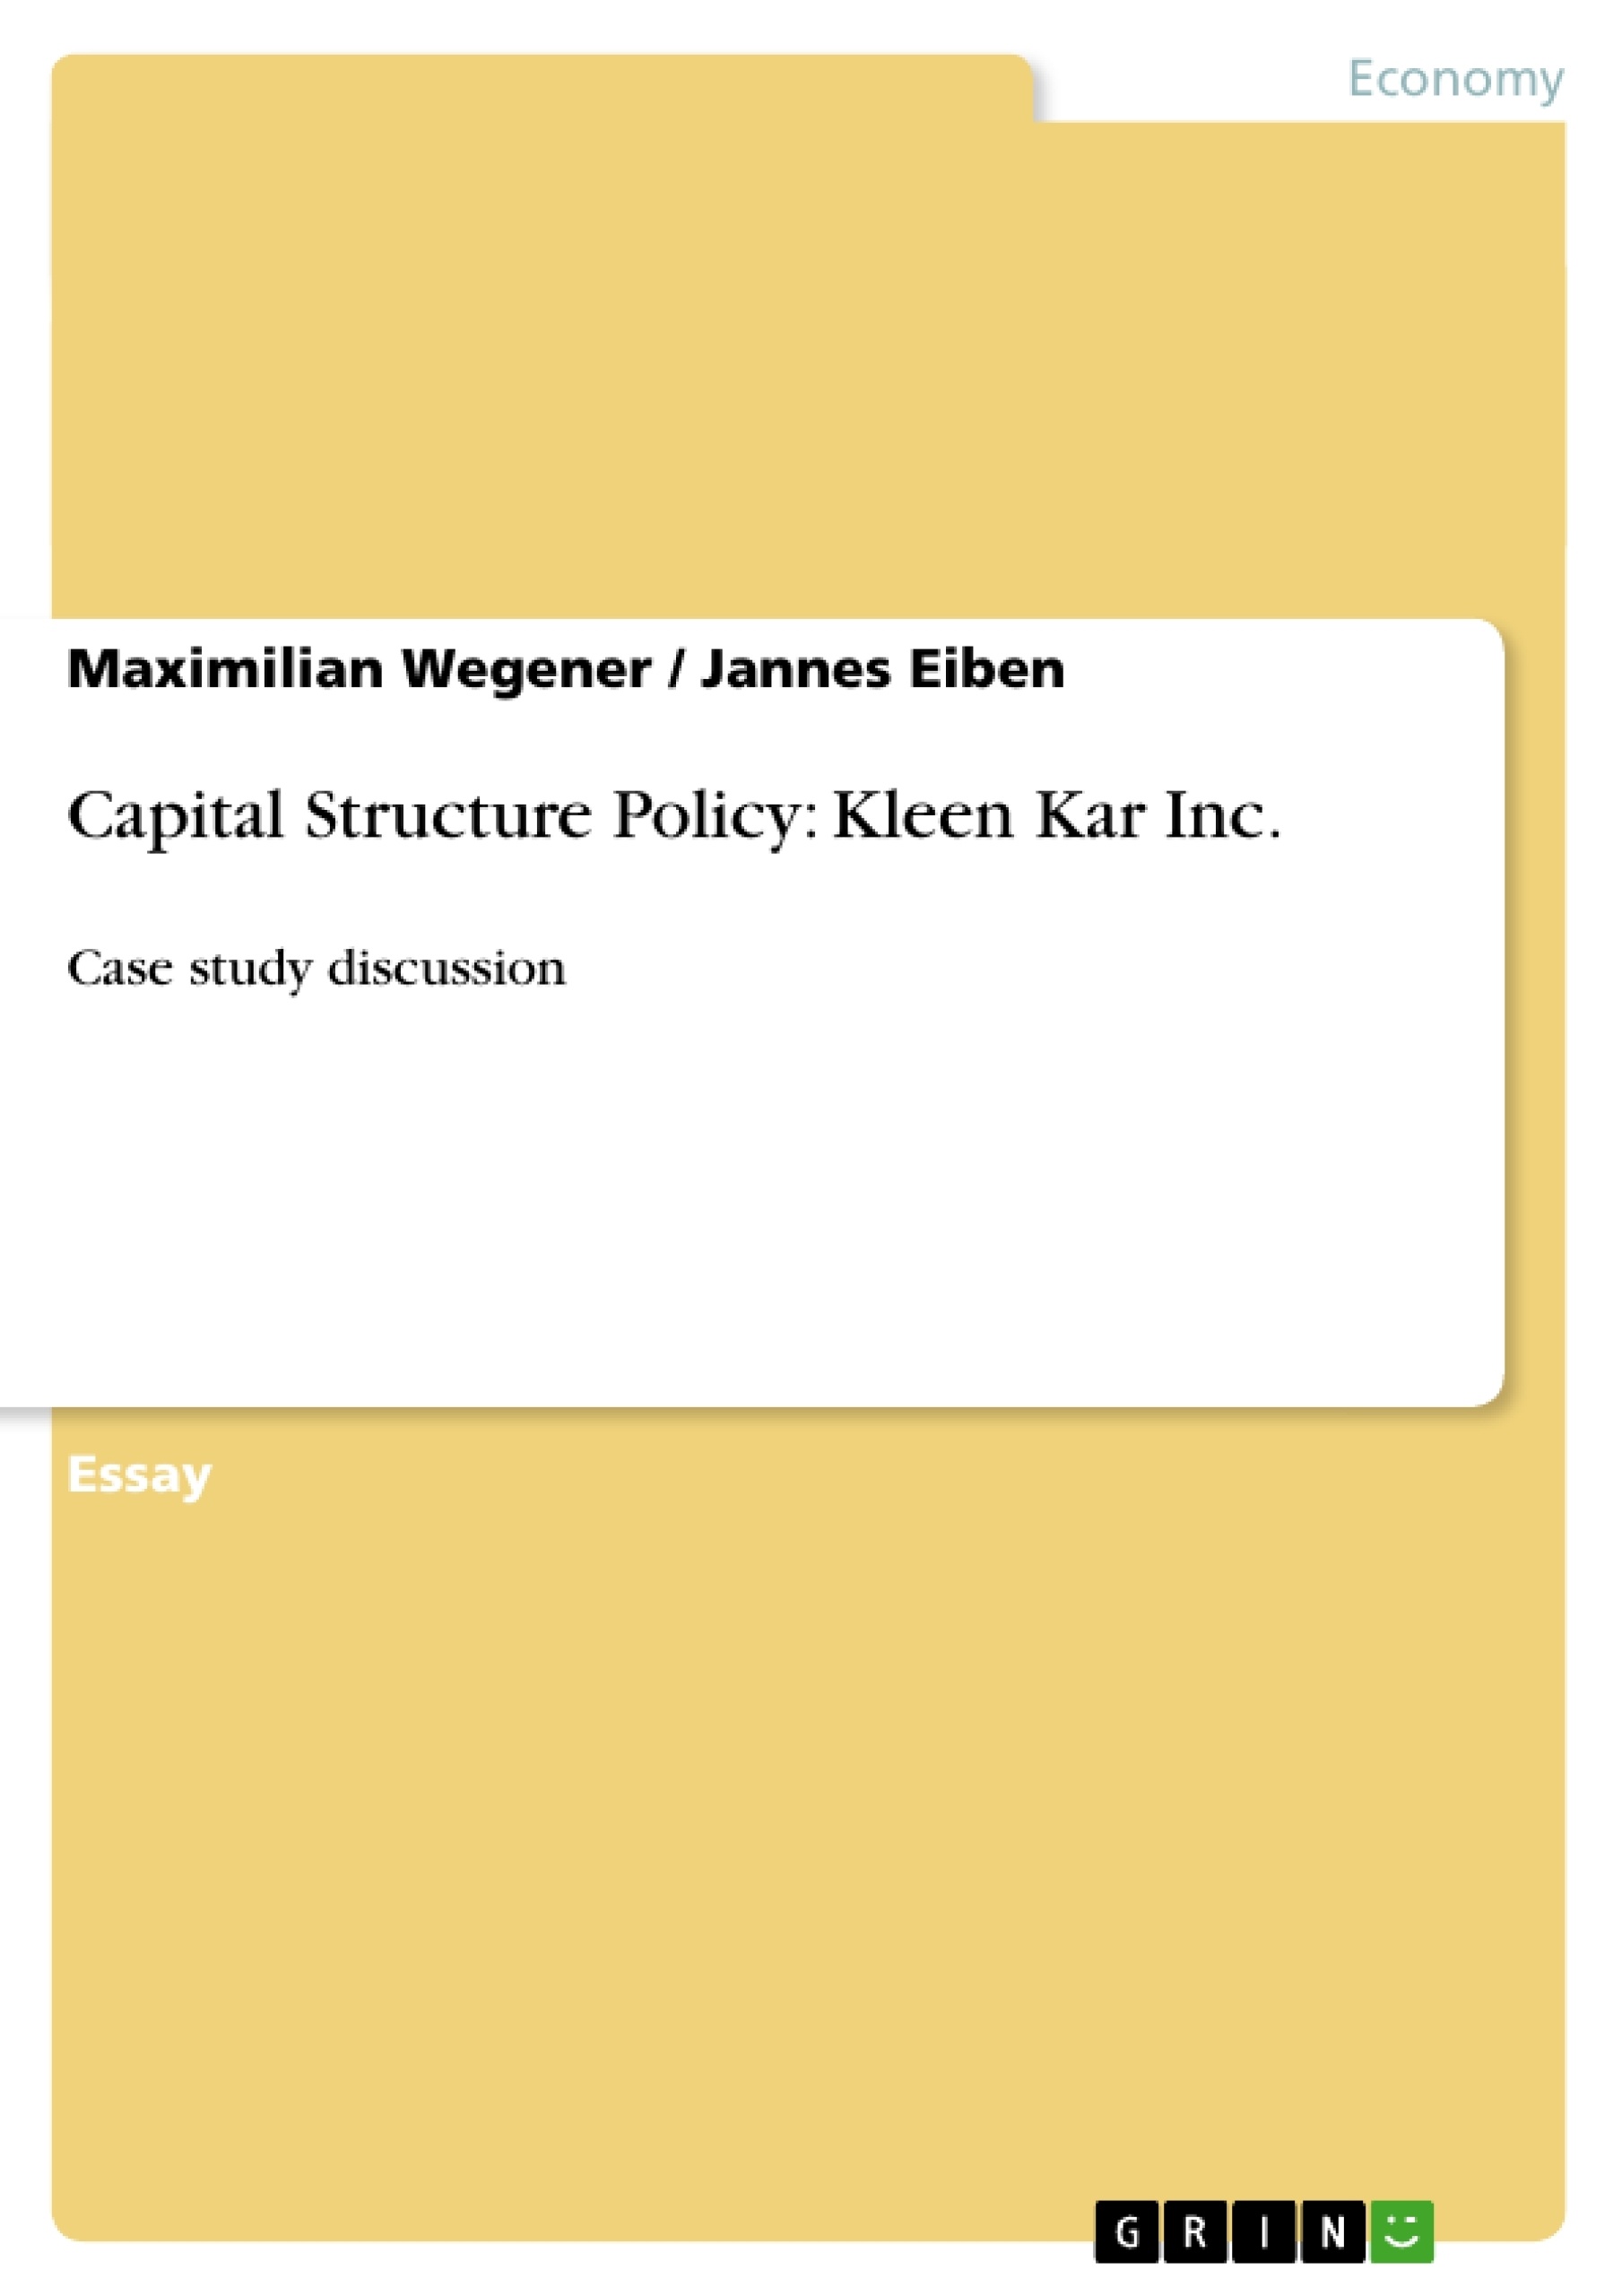 Title: Capital Structure Policy: Kleen Kar Inc.